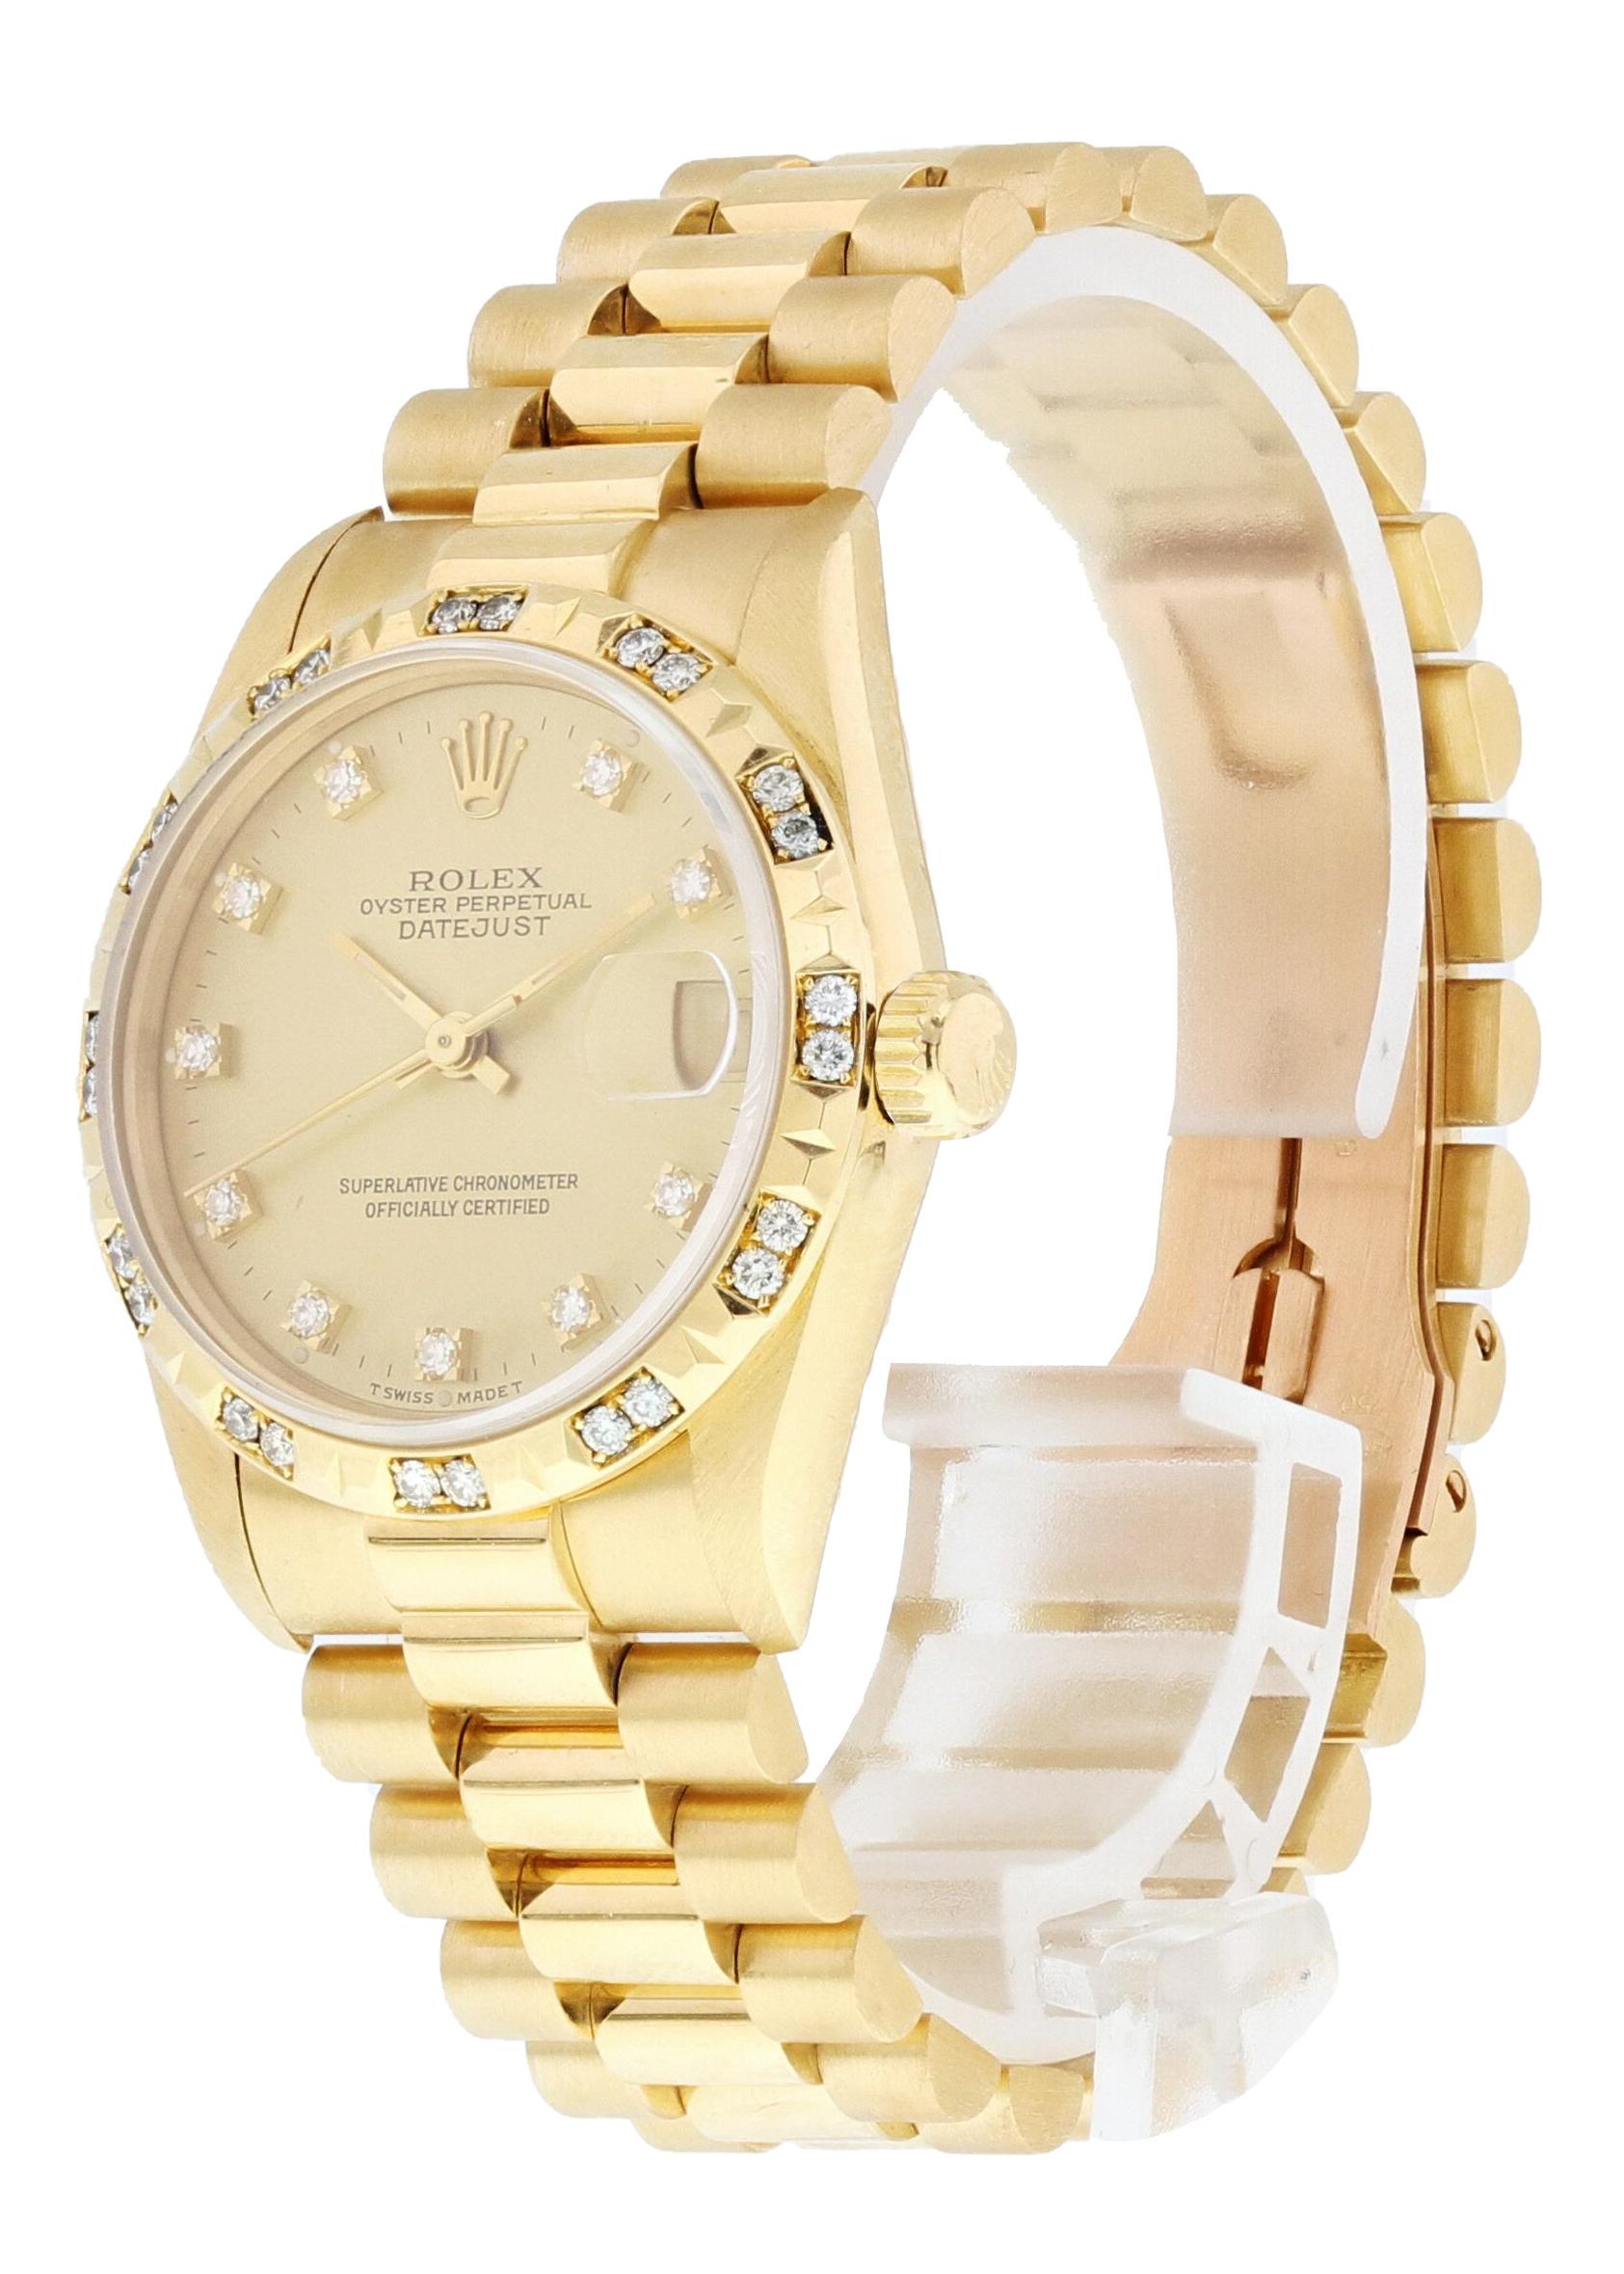 Rolex Oyster Perpetual Datejust 68258 18K Midsize Ladies Watch. 31mm 18k yellow gold case. Fluted bezel with factory placed diamonds. Champagne dial with gold hands and Factory placed diamonds. Quickset date display at the 3 o'clock position. 18K